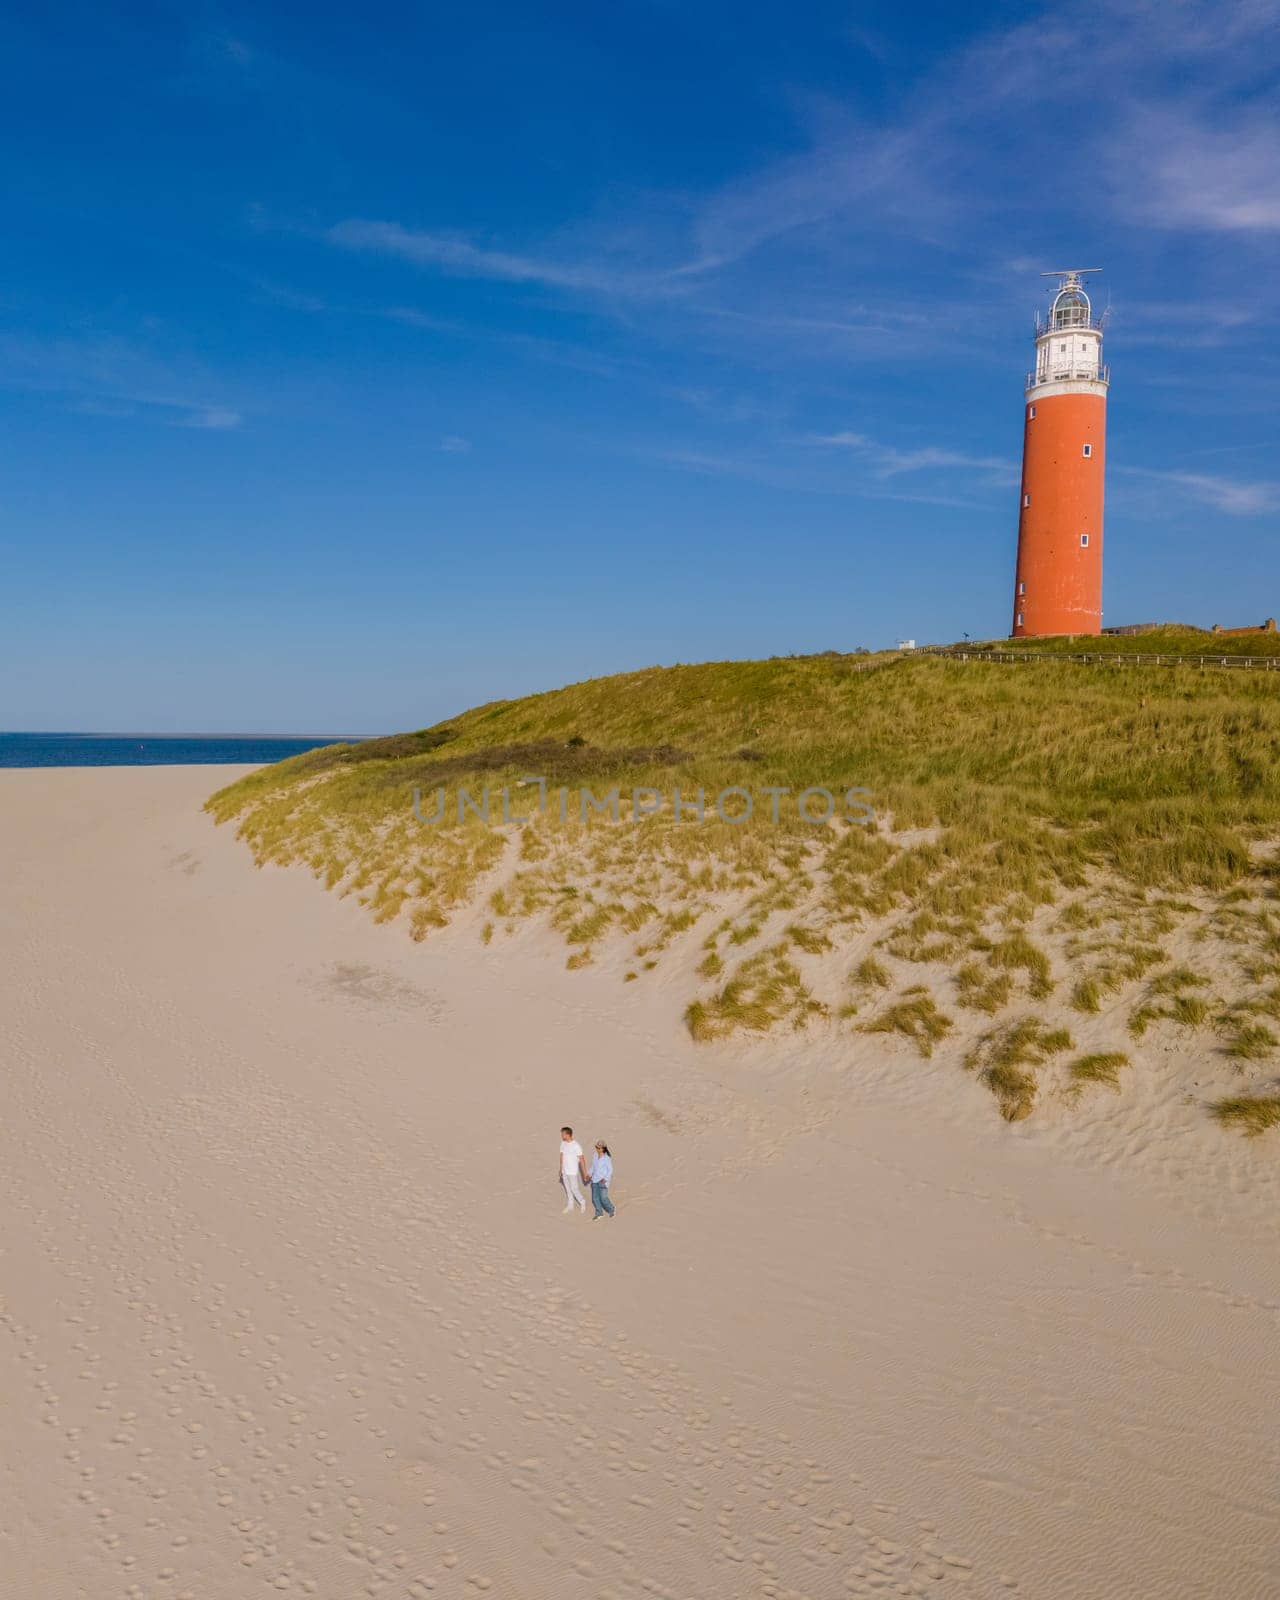 An aerial view of a majestic lighthouse standing tall on the Texel, Netherlands beach, surrounded by golden sand and the soothing waves of the sea.